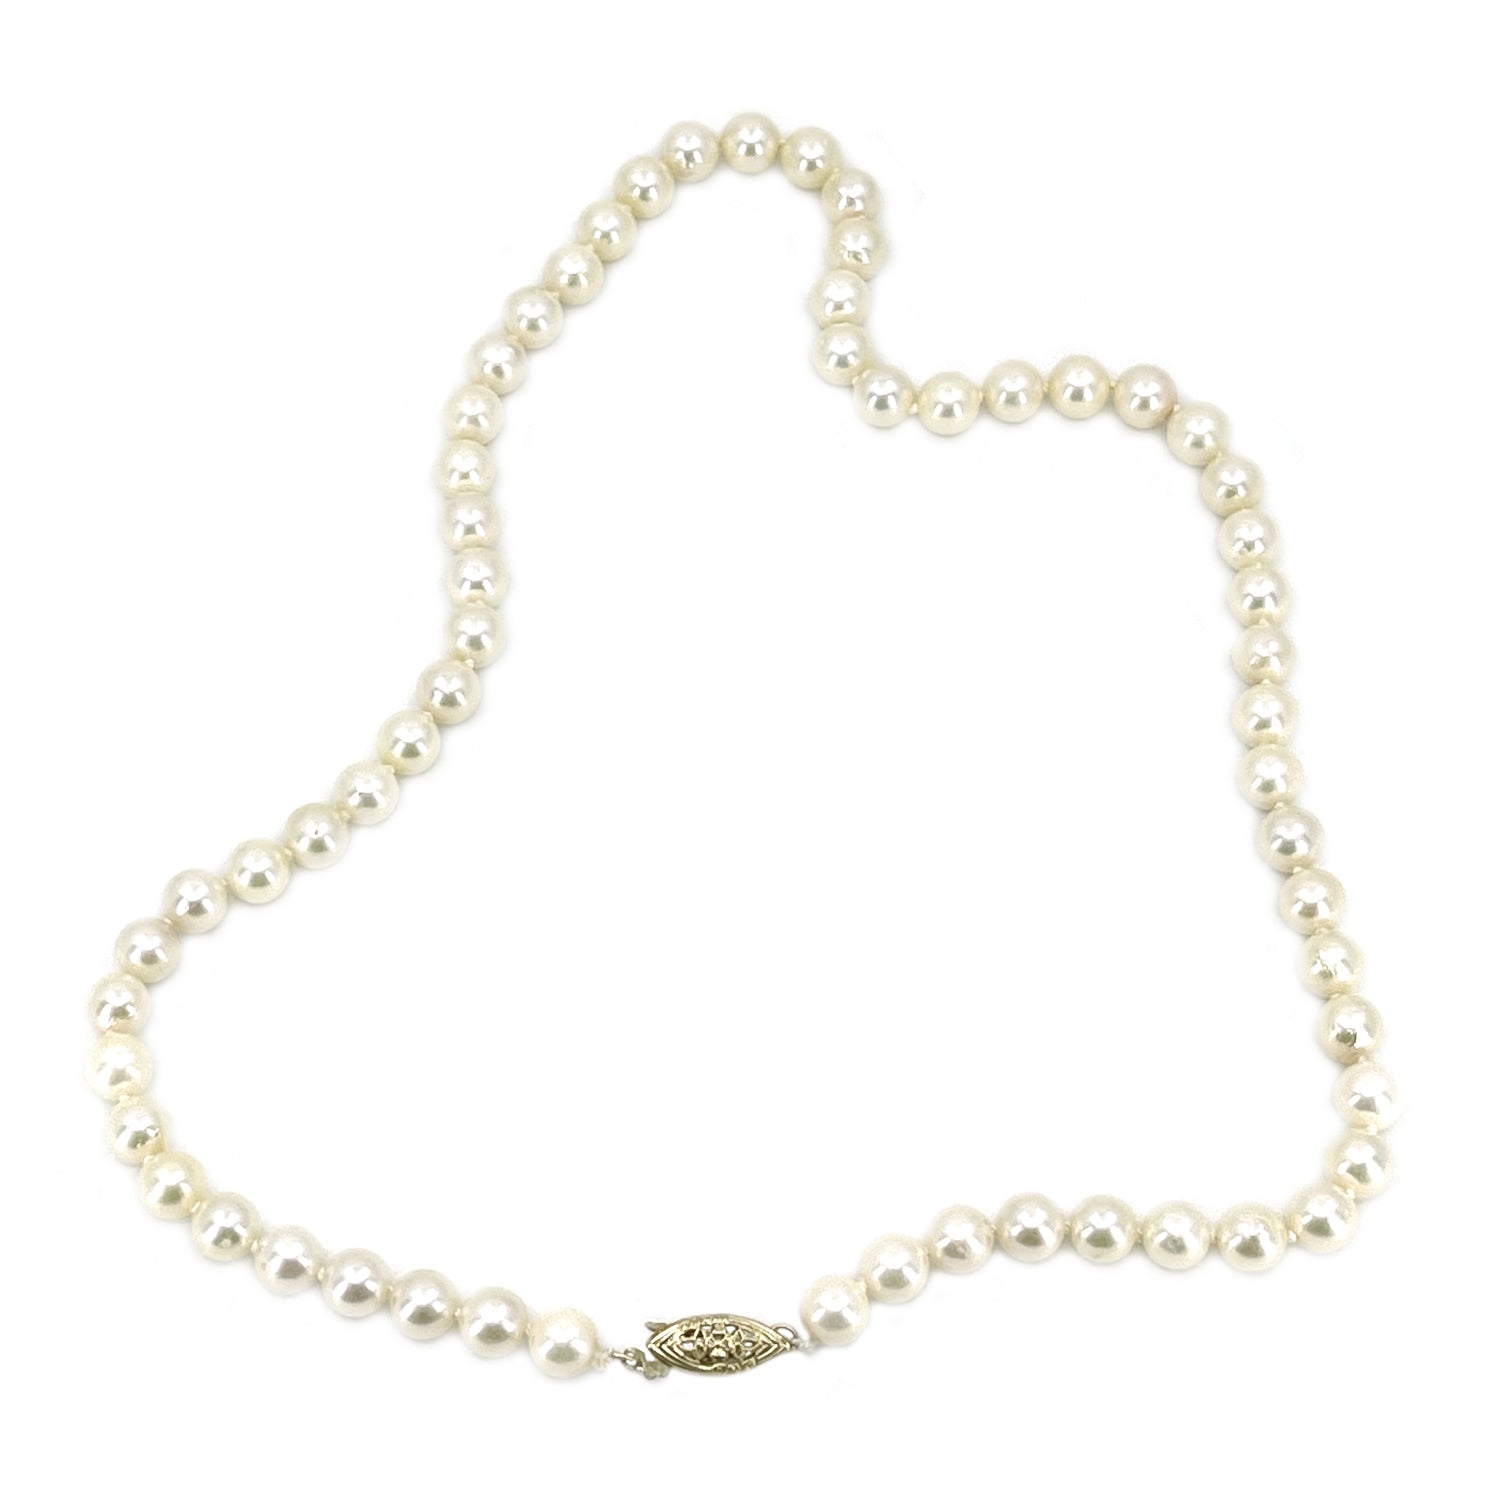 Murata Vintage Japanese Cultured Akoya Pearl Strand Necklace Box- 14K Yellow Gold 17.75 Inch